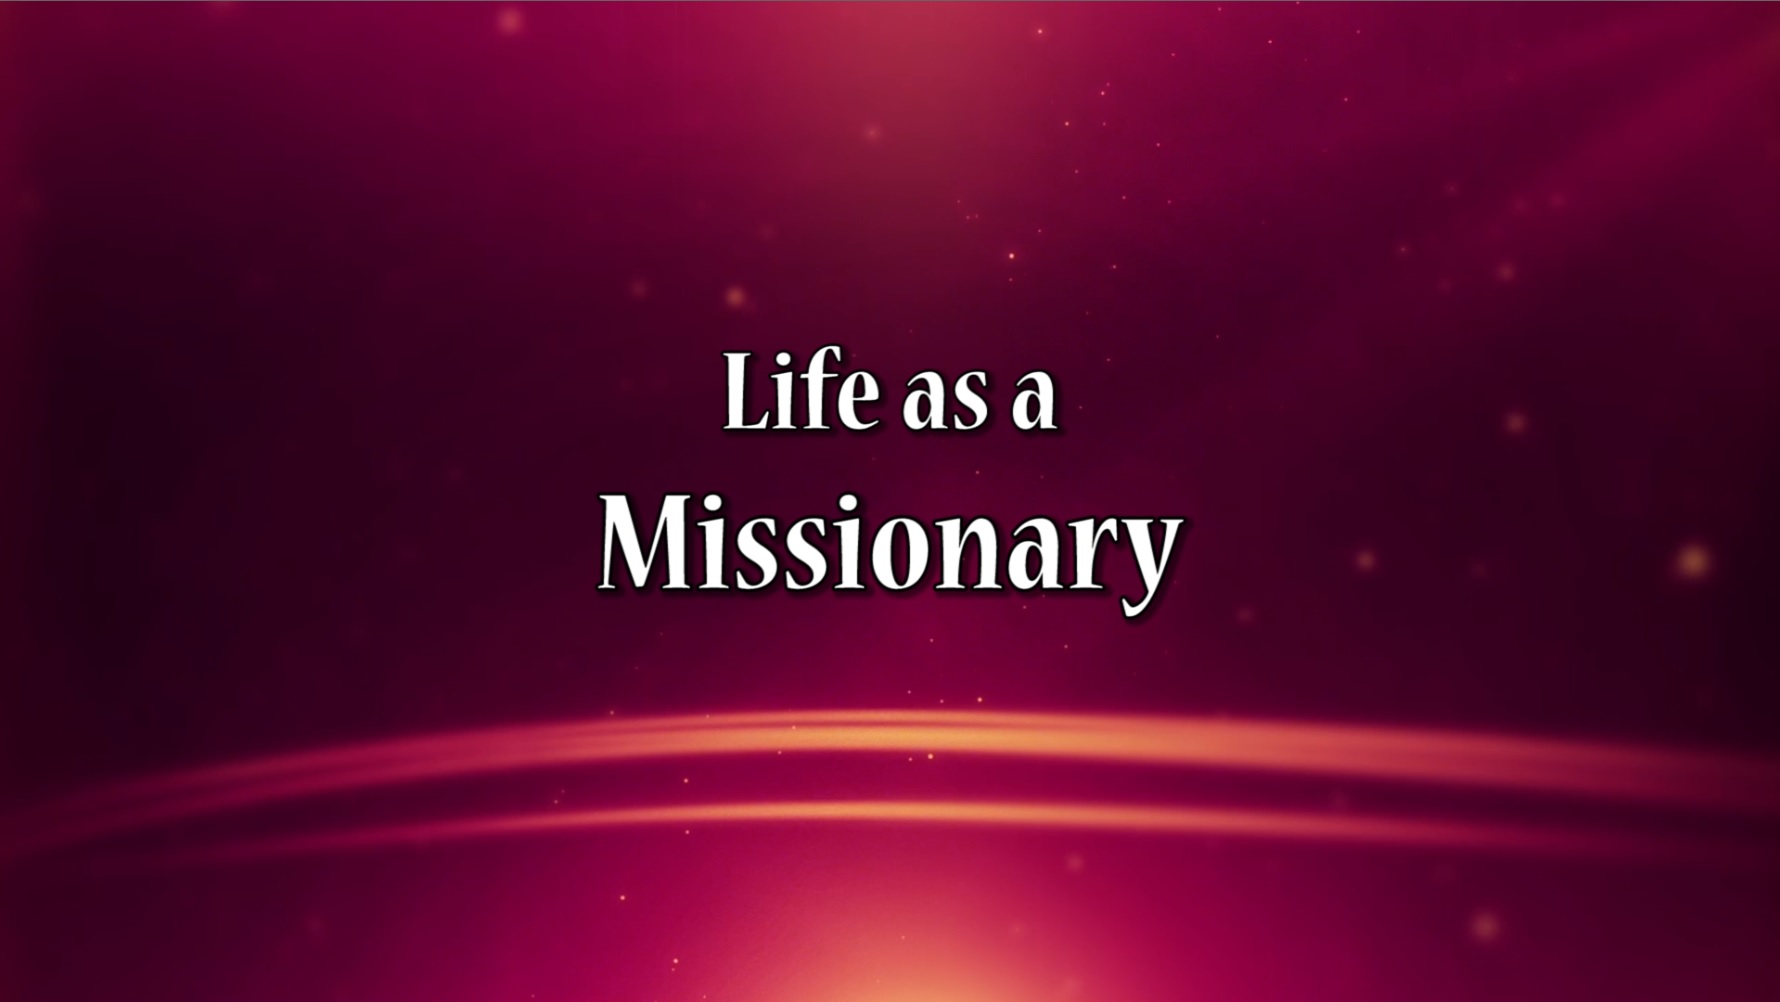 Life as a Missionary - Anthony Santiago - www.anthonysantiago.org - Online Word of God